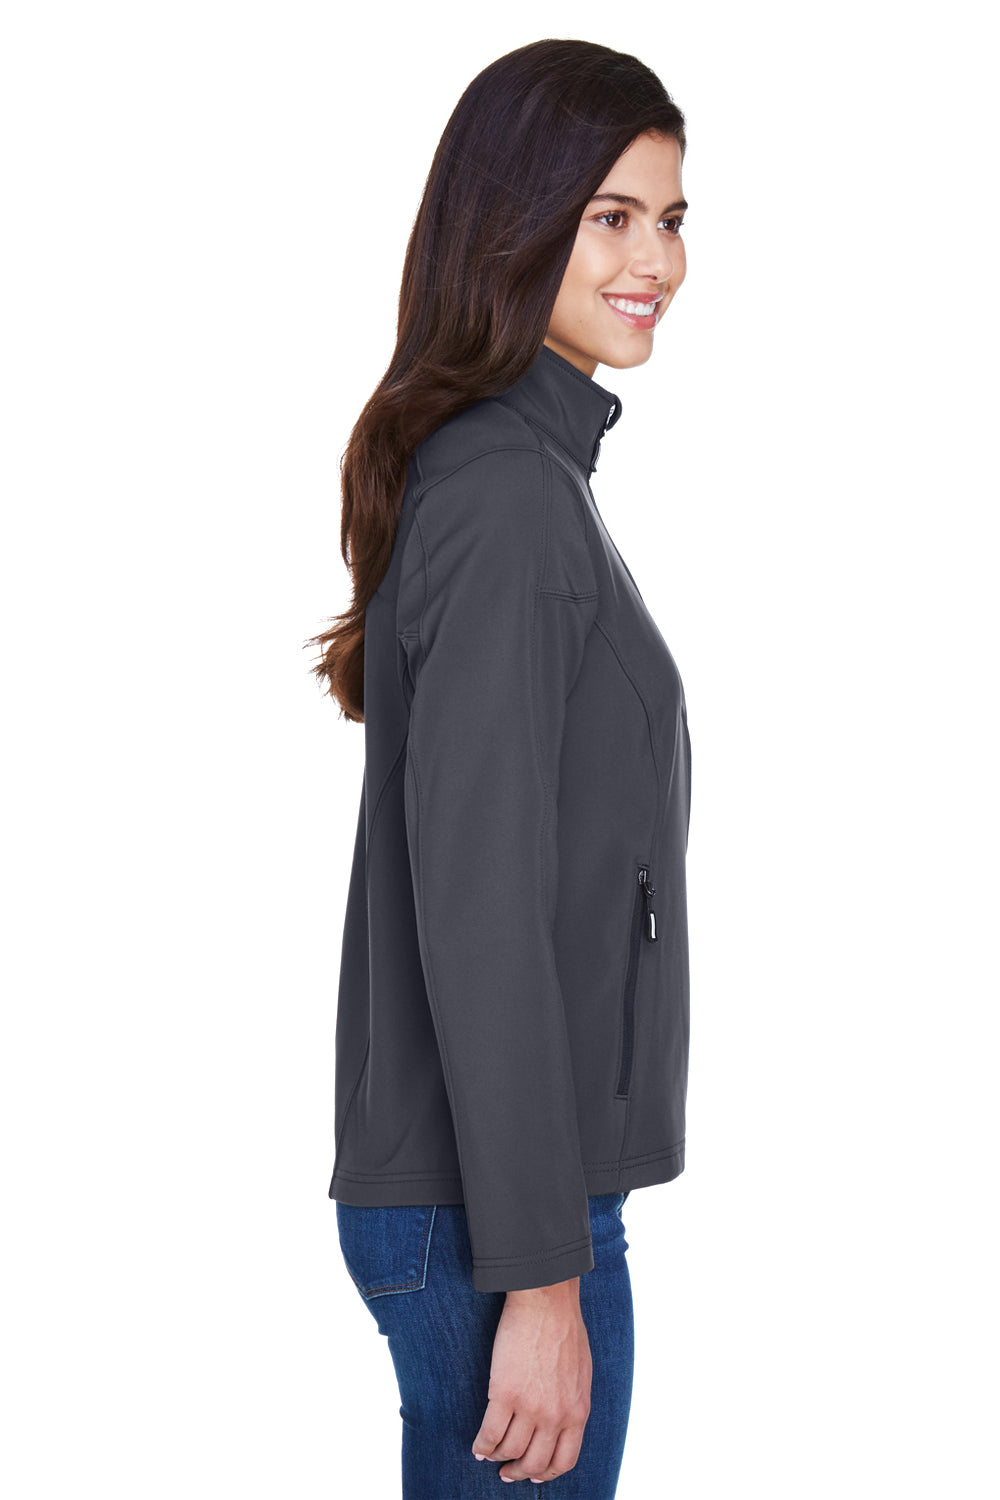 Core 365 78184 Womens Cruise Water Resistant Full Zip Jacket Carbon Grey Side